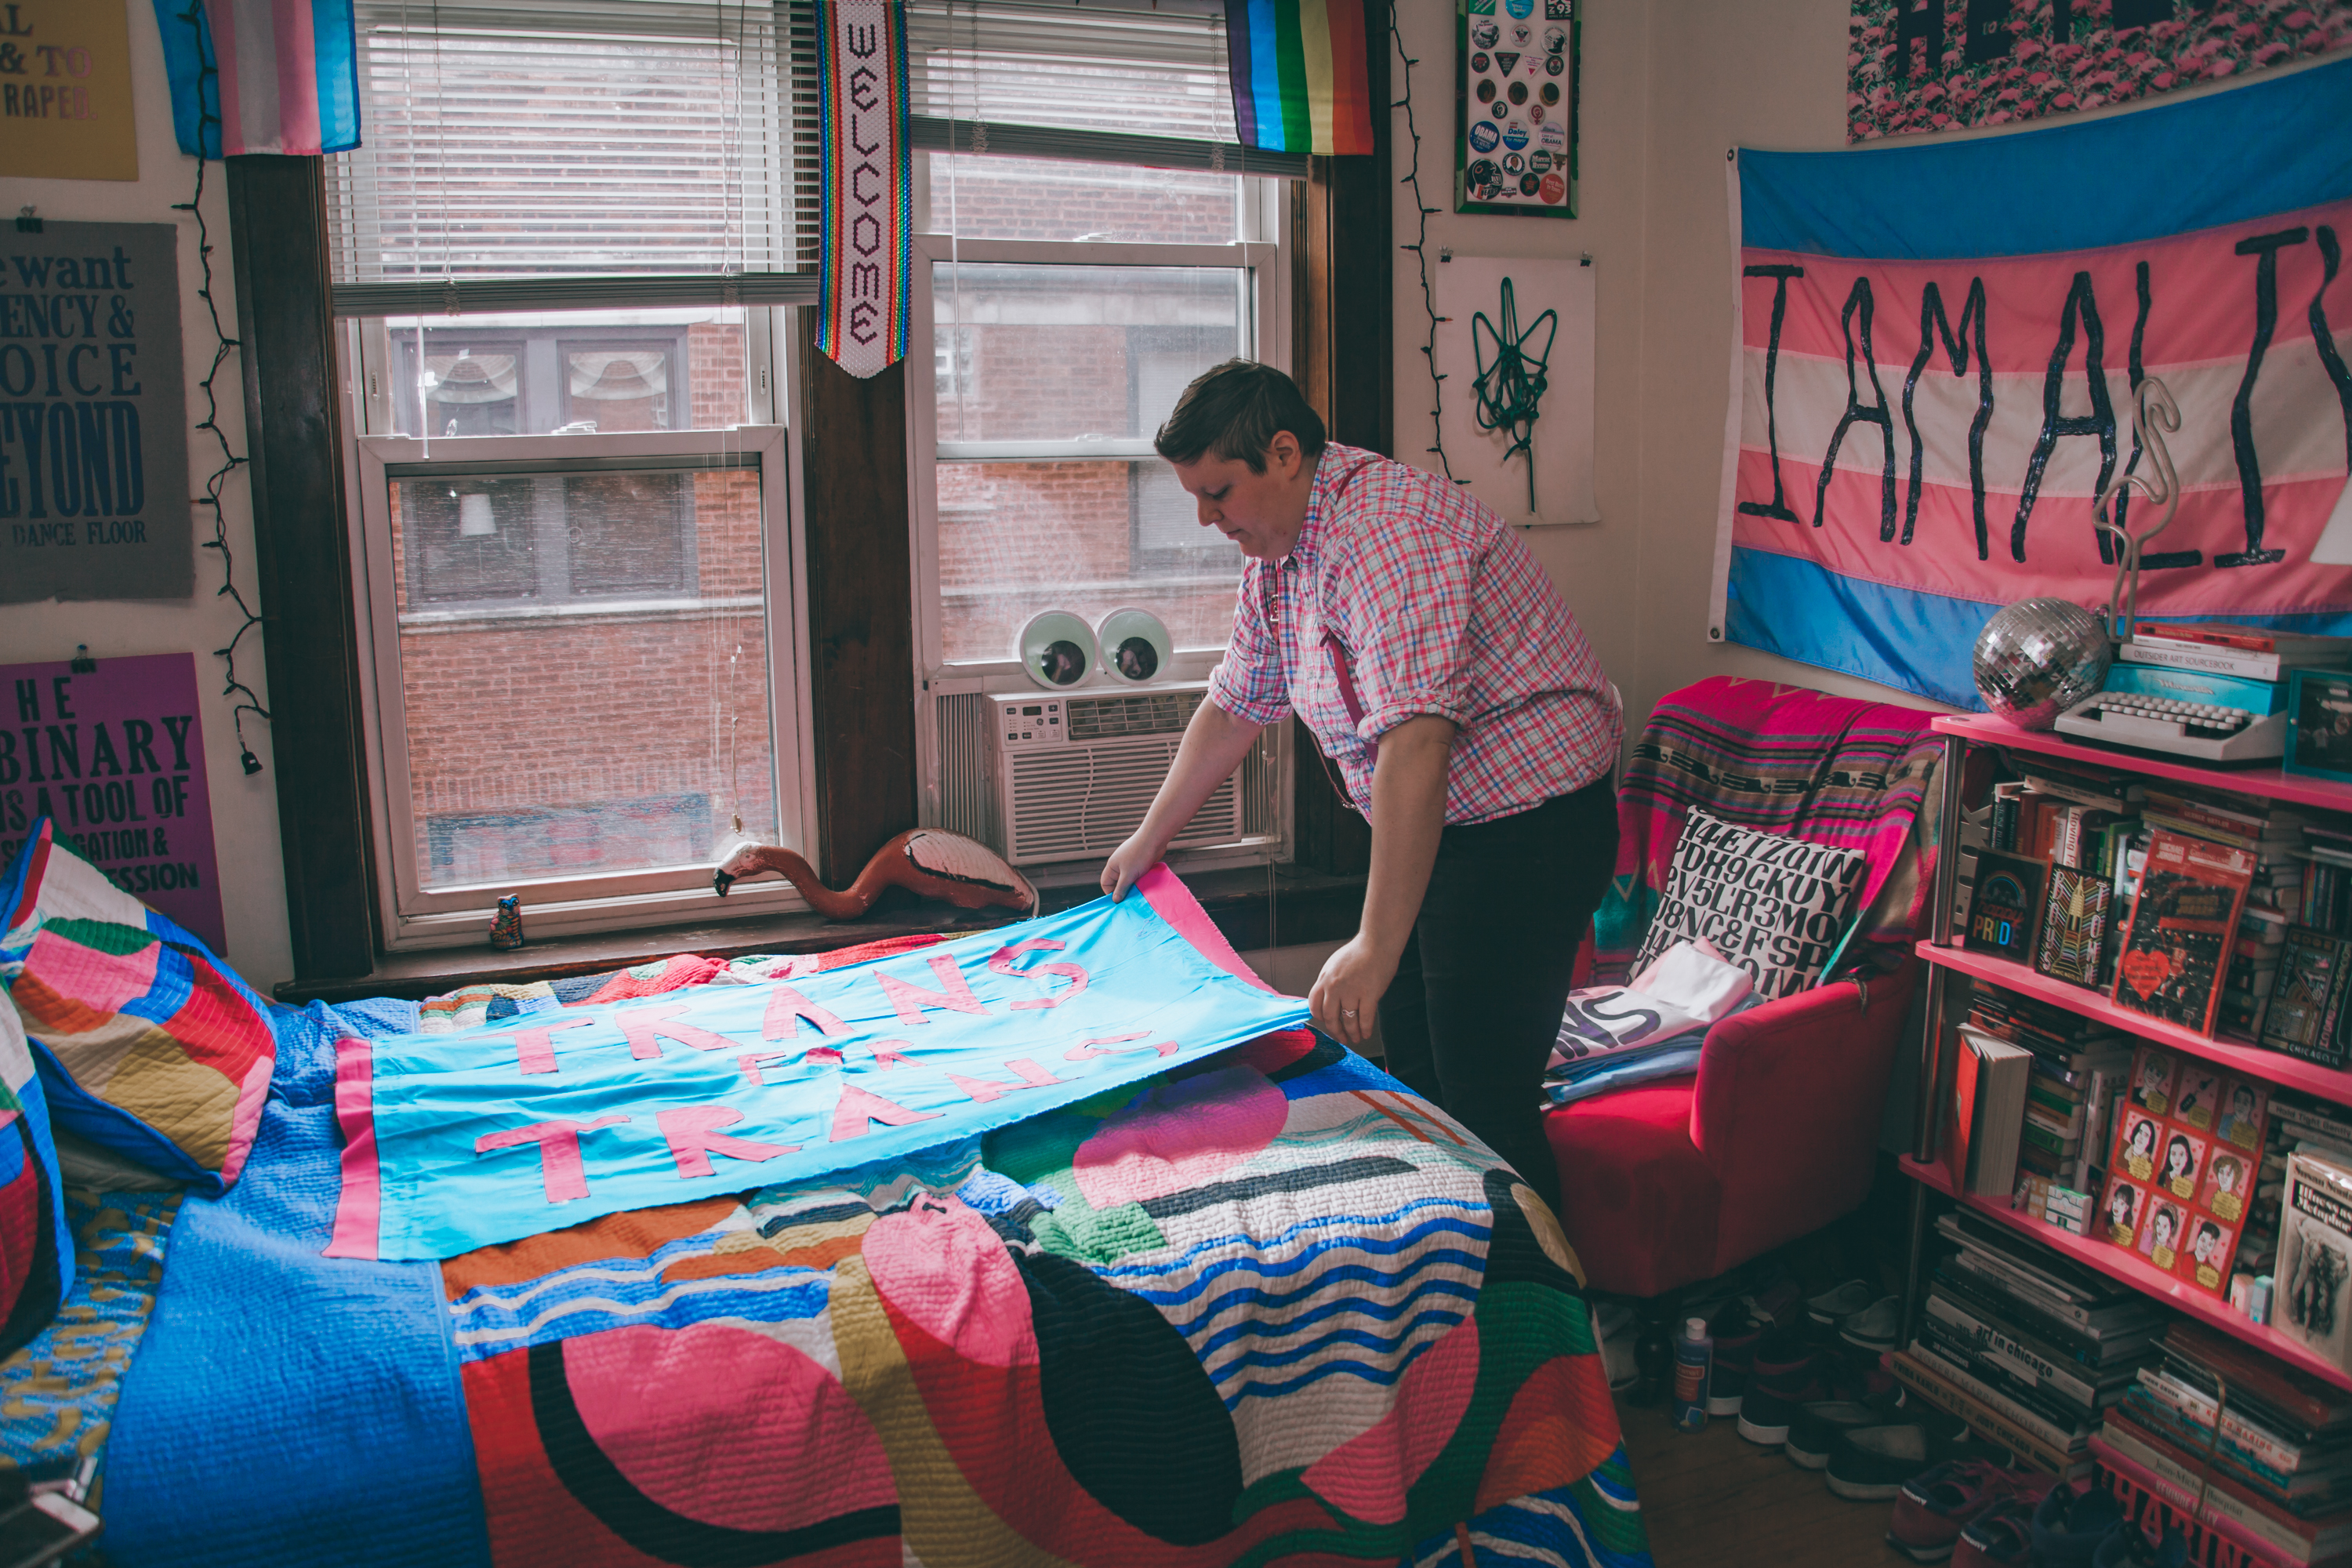 Image: H. Melt arranges a blue banner that says "Trans for Trans" on a bed with a multicolored bedspread in their apartment. Photo by Ally Almore.